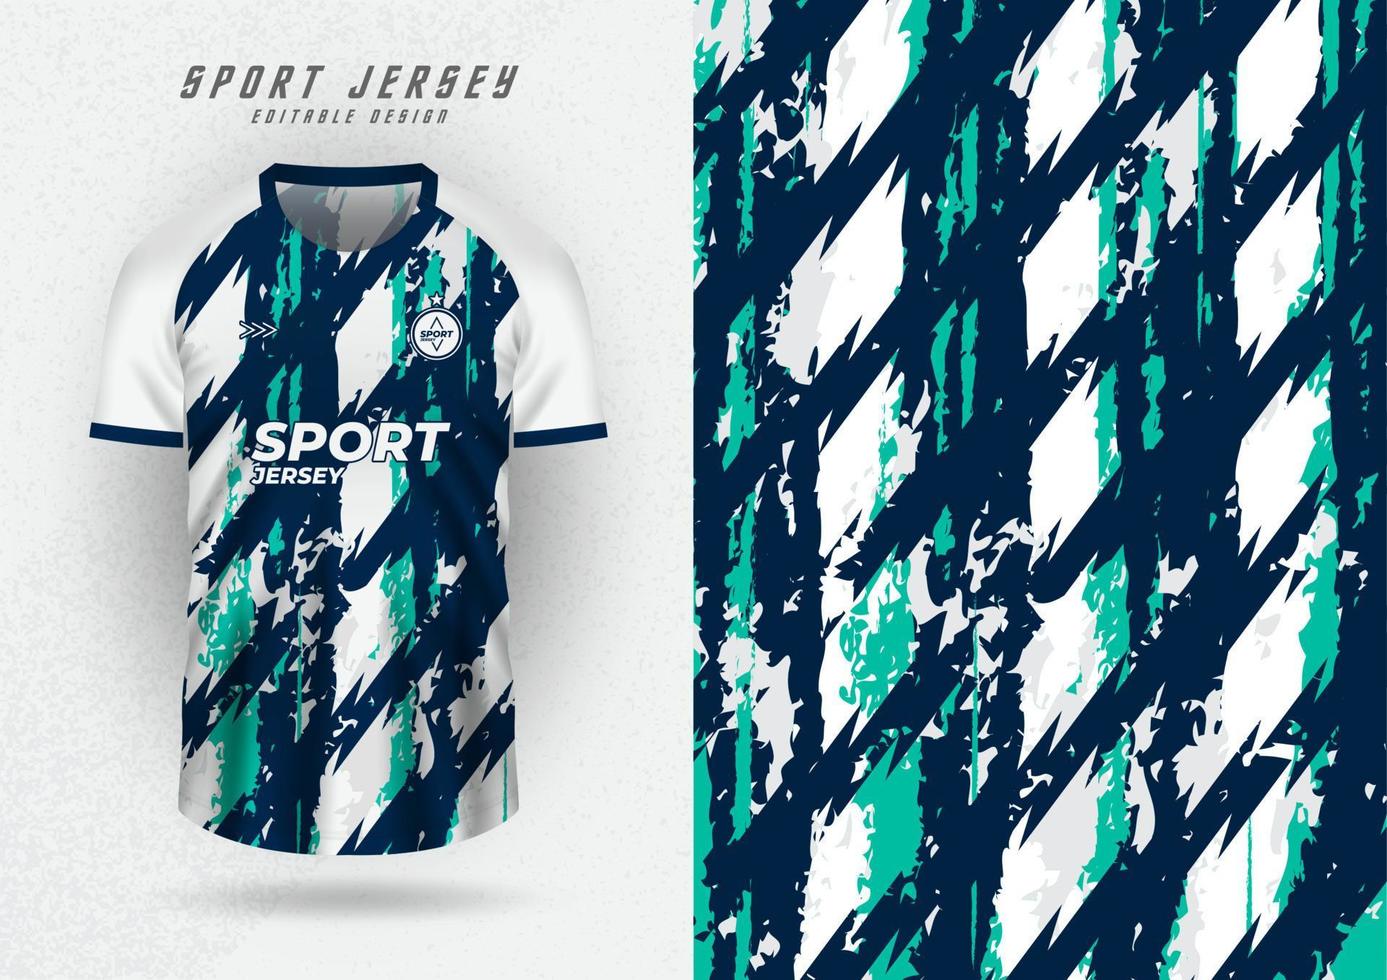 Background mockup for sports jerseys, jerseys, running shirts, grunge pattern and white sleeves vector